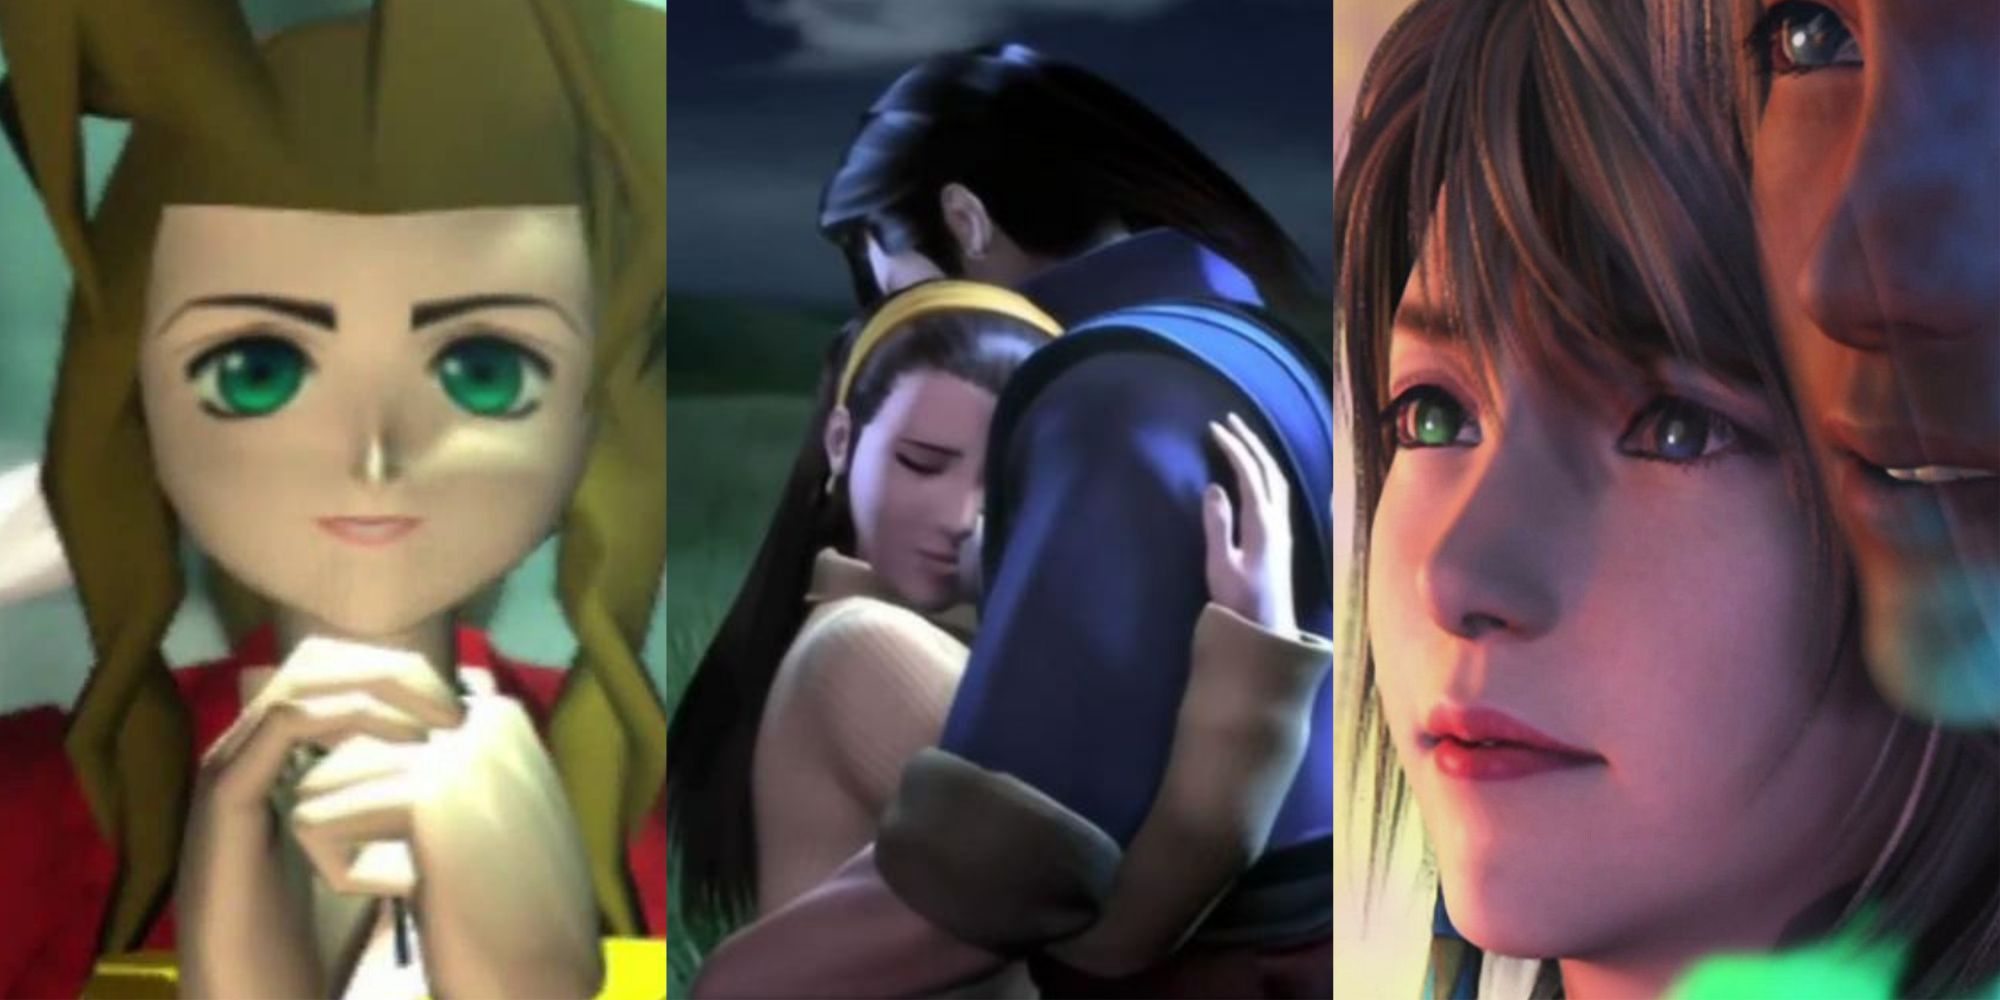 Aerith's death from FF7, Laguna and Raine hugging from FF8, and Yuna with a fading Tidus from FF10